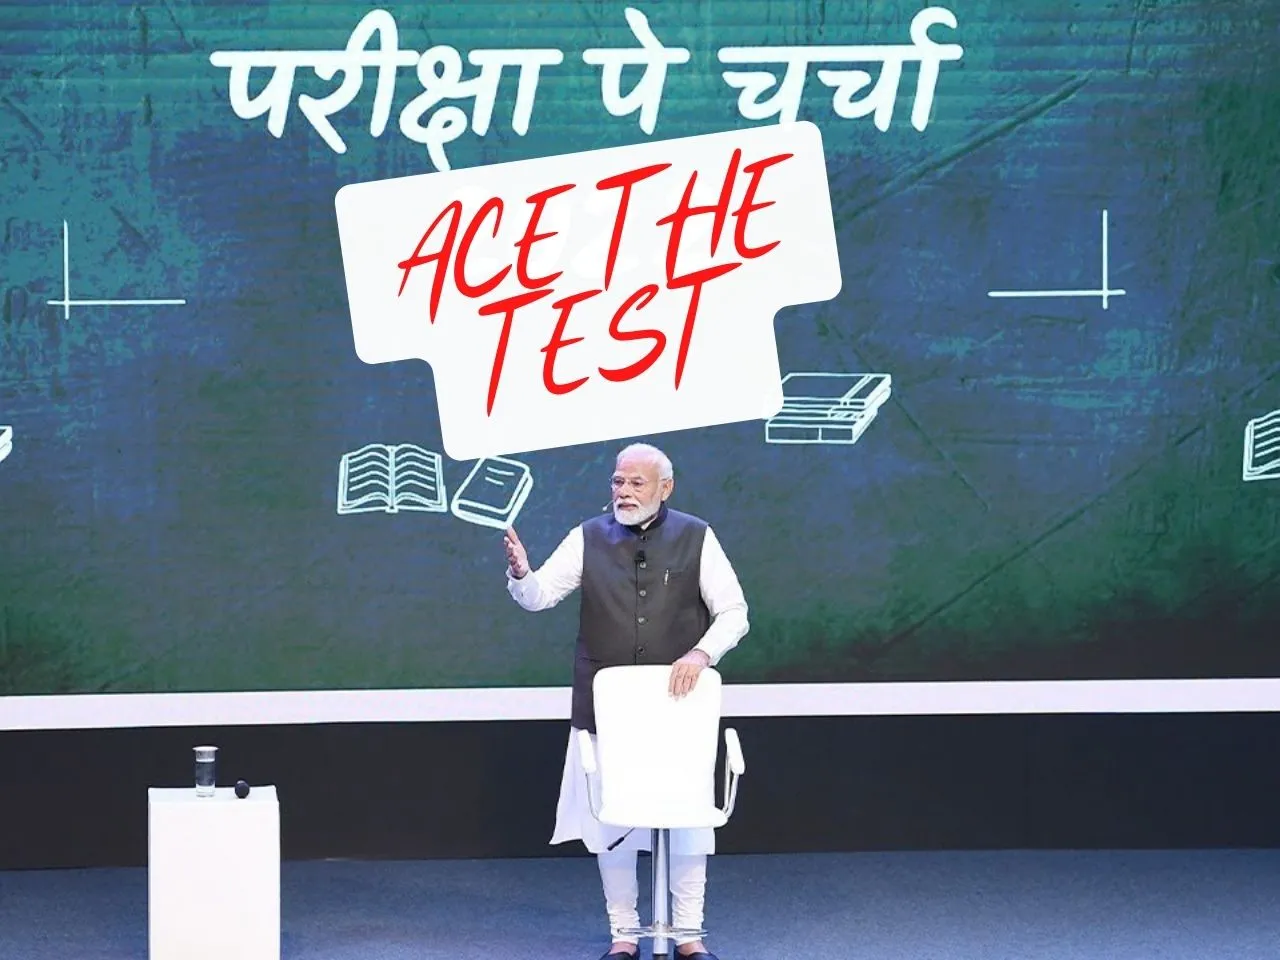 Acing the Test: What Startups can learn from Modi's Pariksha Pe Charcha